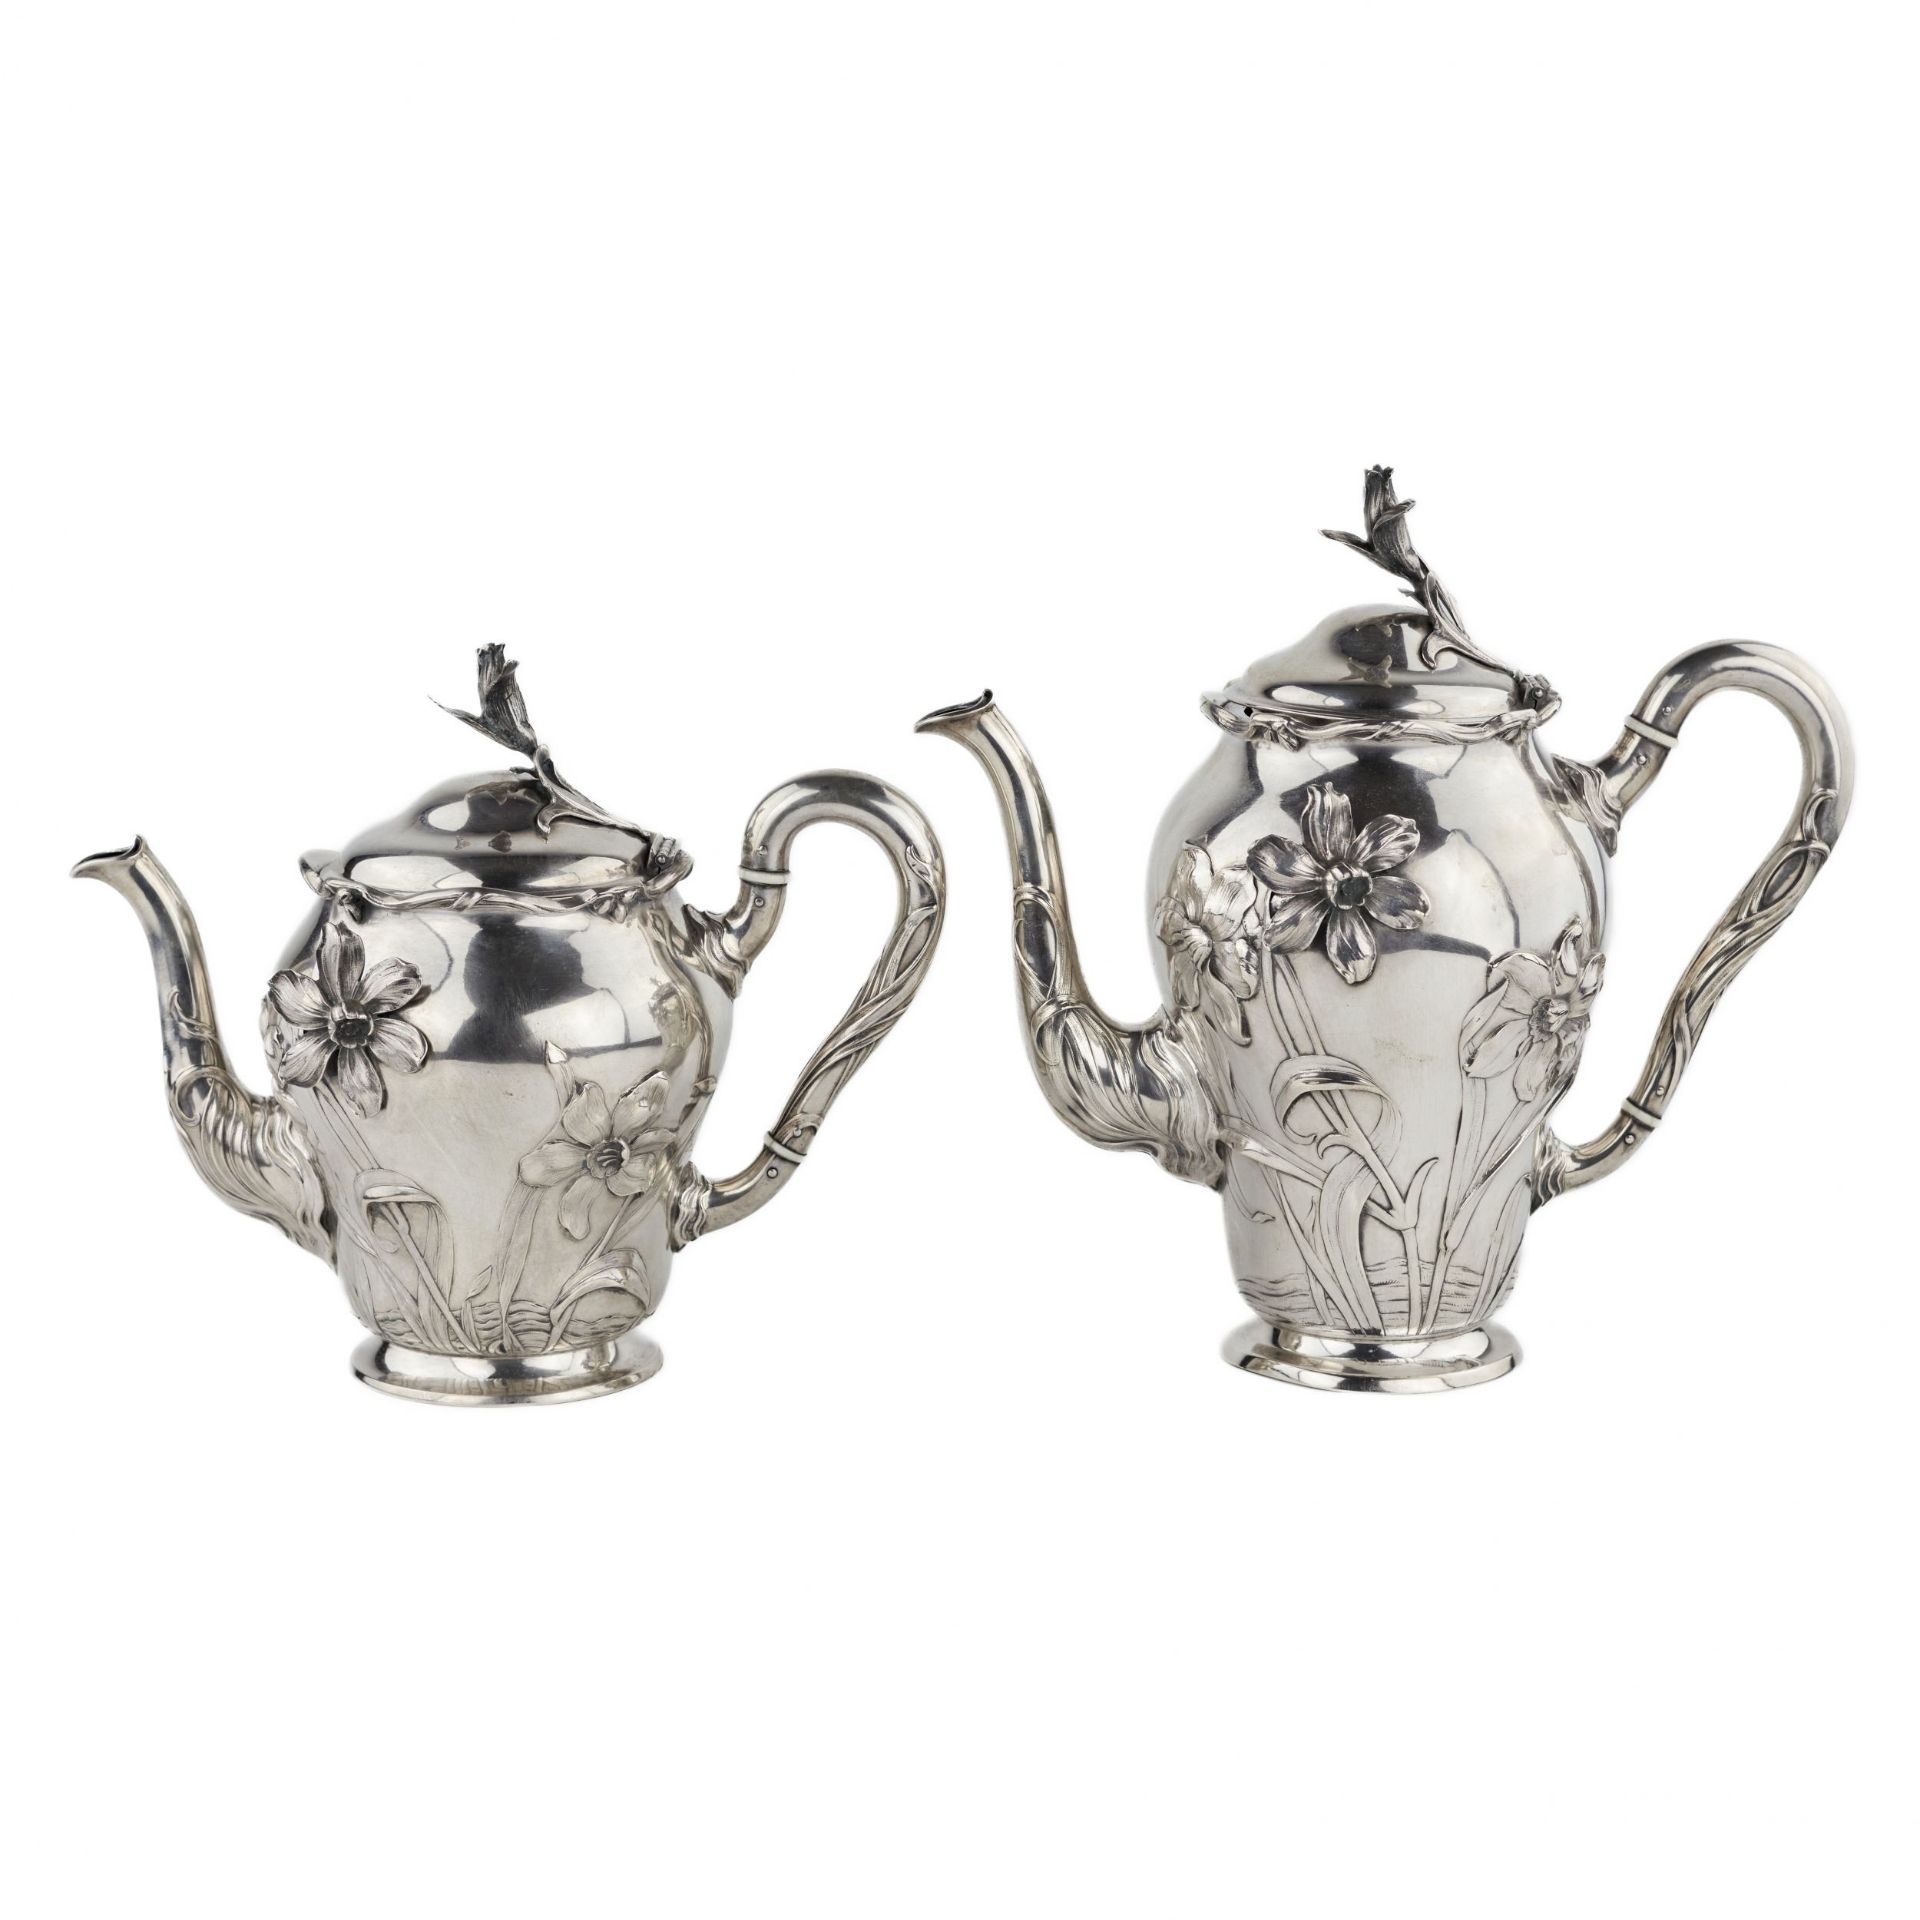 Silver tea and coffee service in Art Nouveau style. Bruckmann. After 1888. - Image 5 of 13